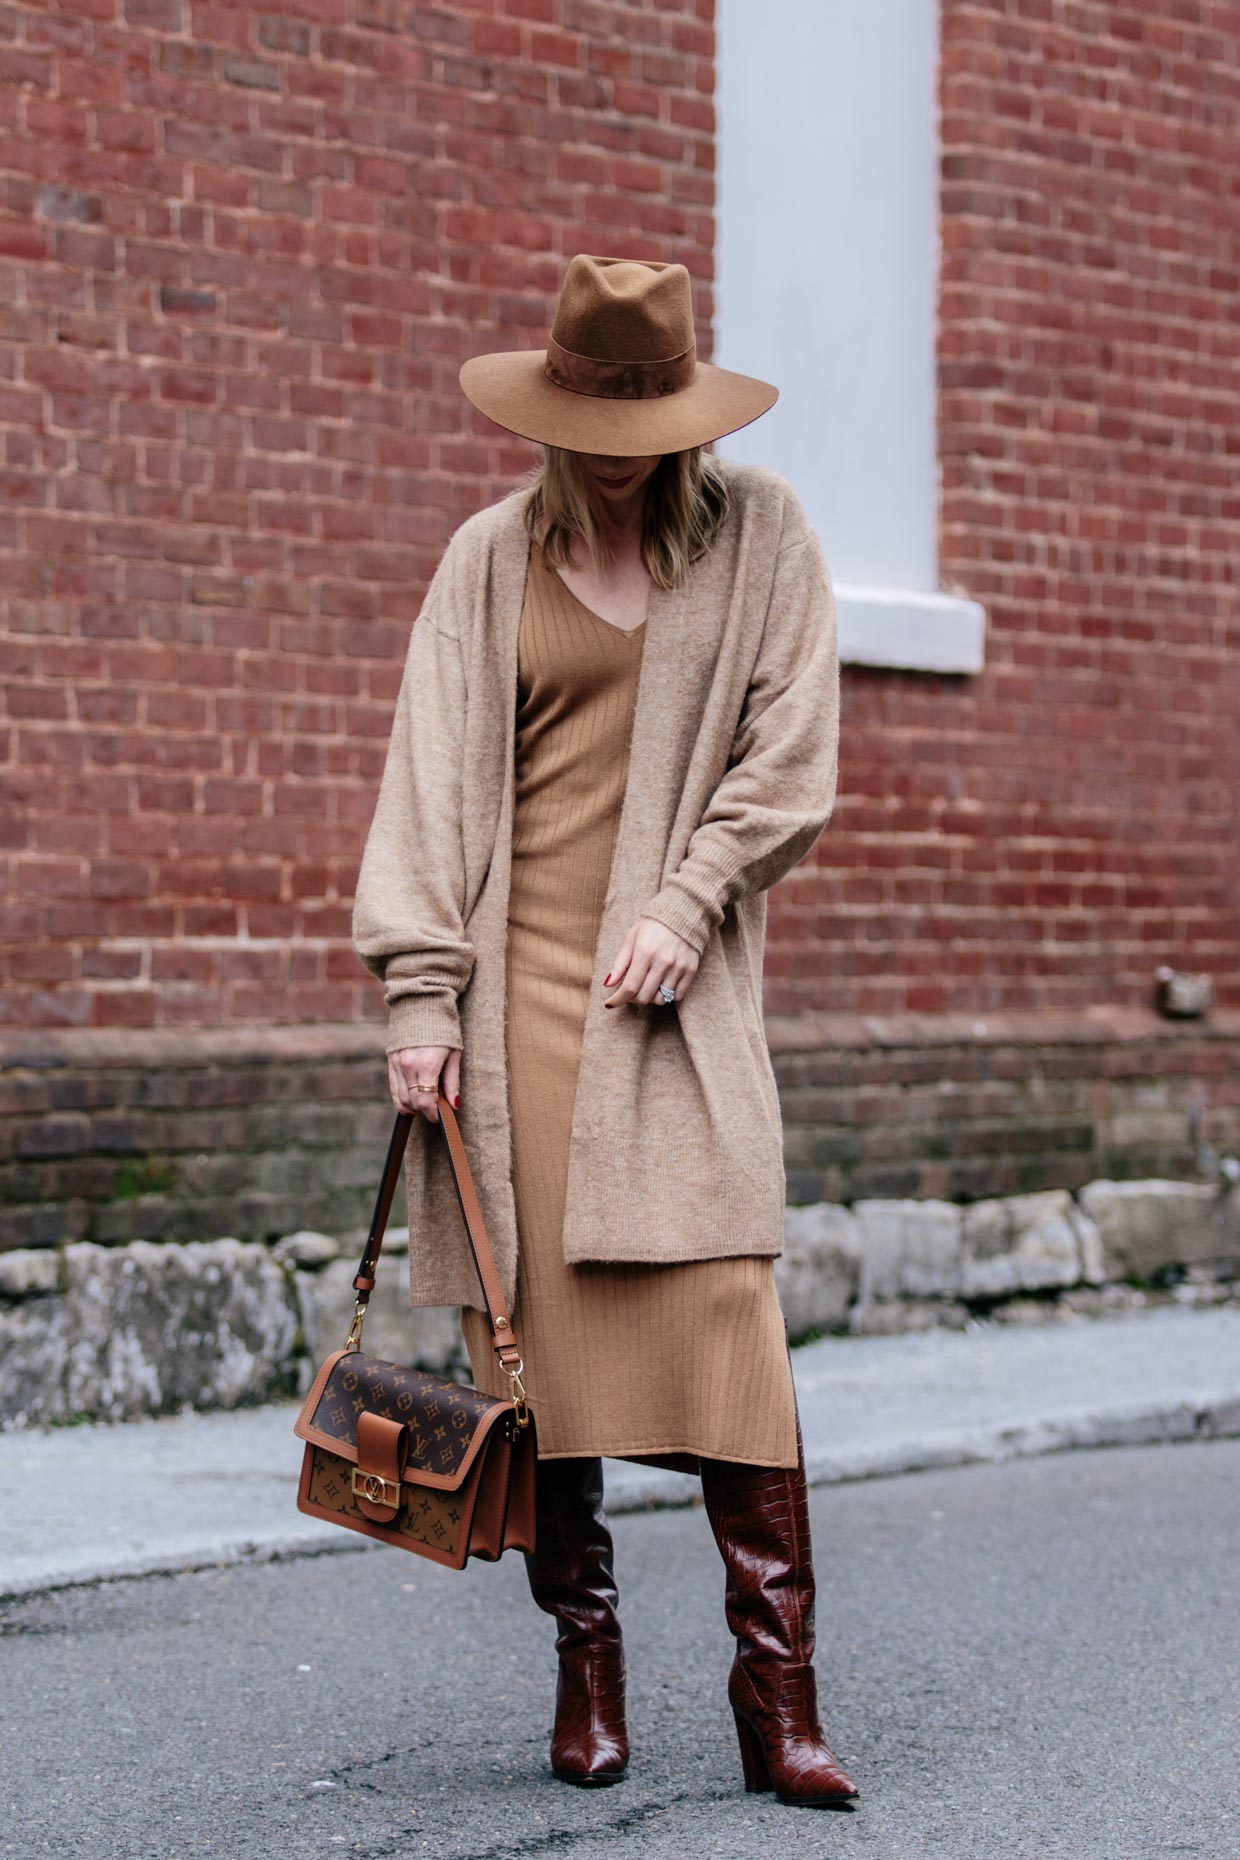 Meagan Brandon fashion blogger of Meagan's Moda shows how to wear monochromatic camel outfit for fall with long cardigan, knit dress and camel wool hat